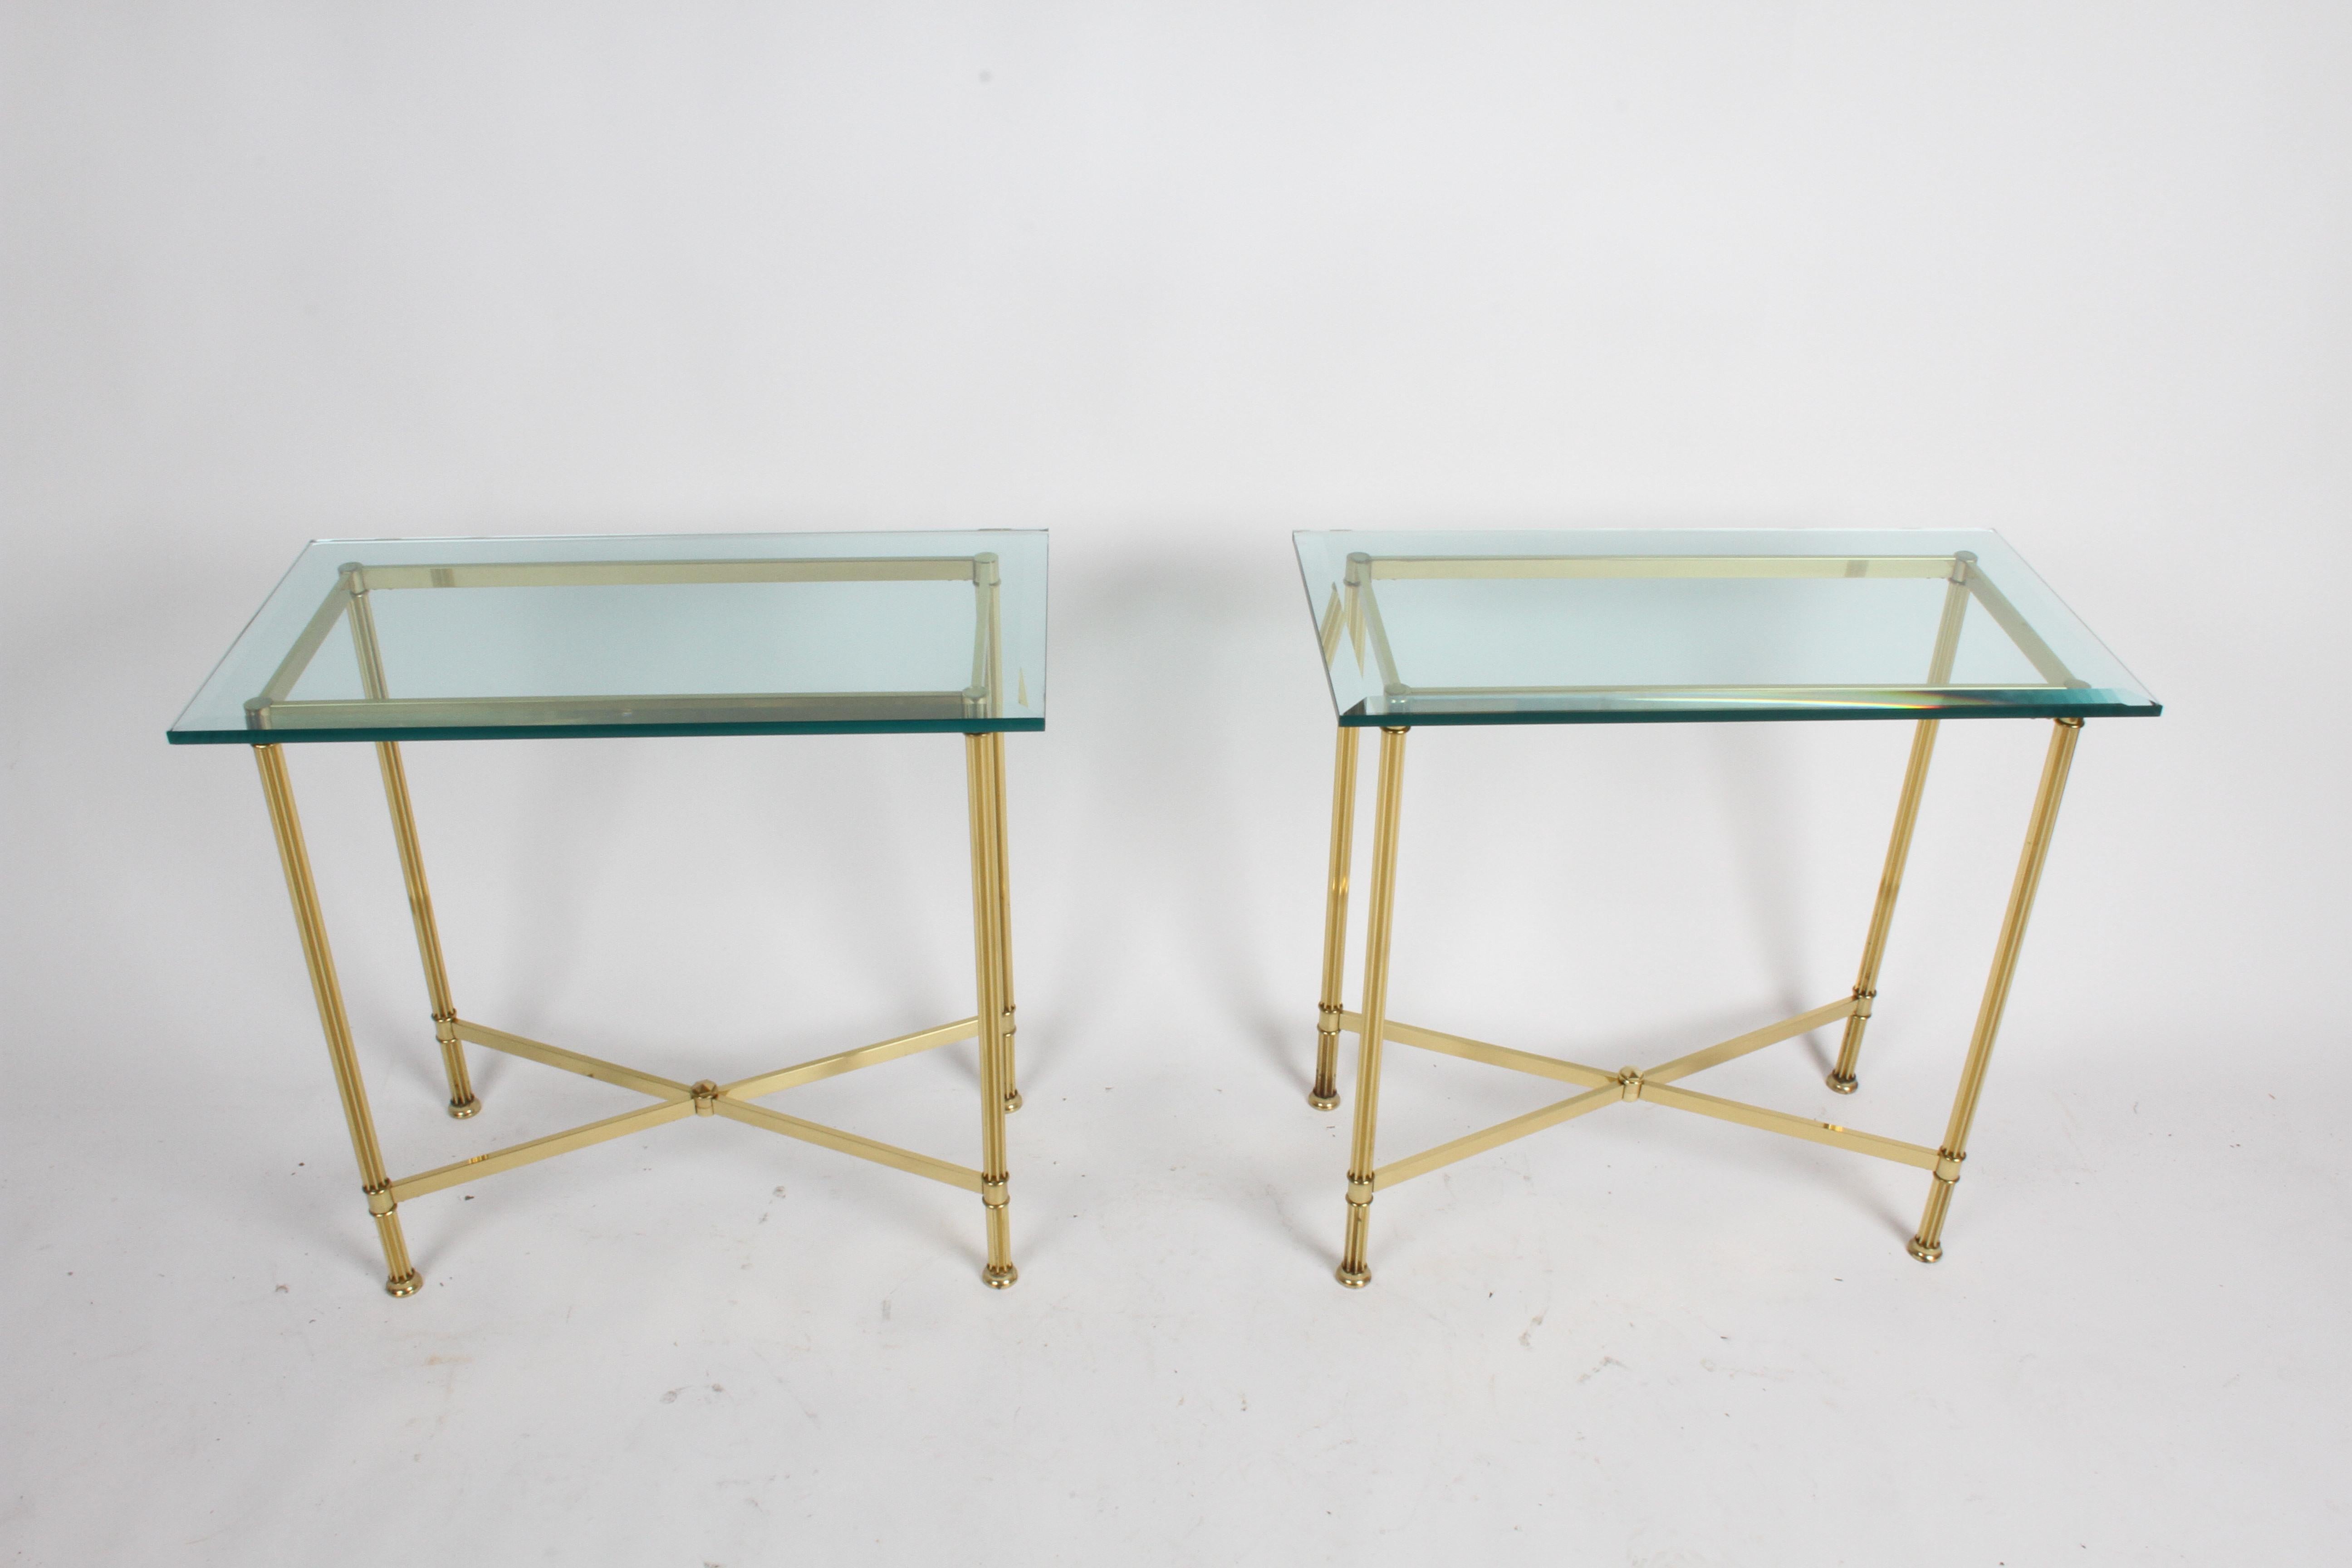 Pair of matching Mastercraft rectangle console tables with beveled glass tops on elegant fluted brass column legs with X-stretcher bracing. Brass is in very nice condition, with factory applied patina. Few minor chips to corners of glass, glass is